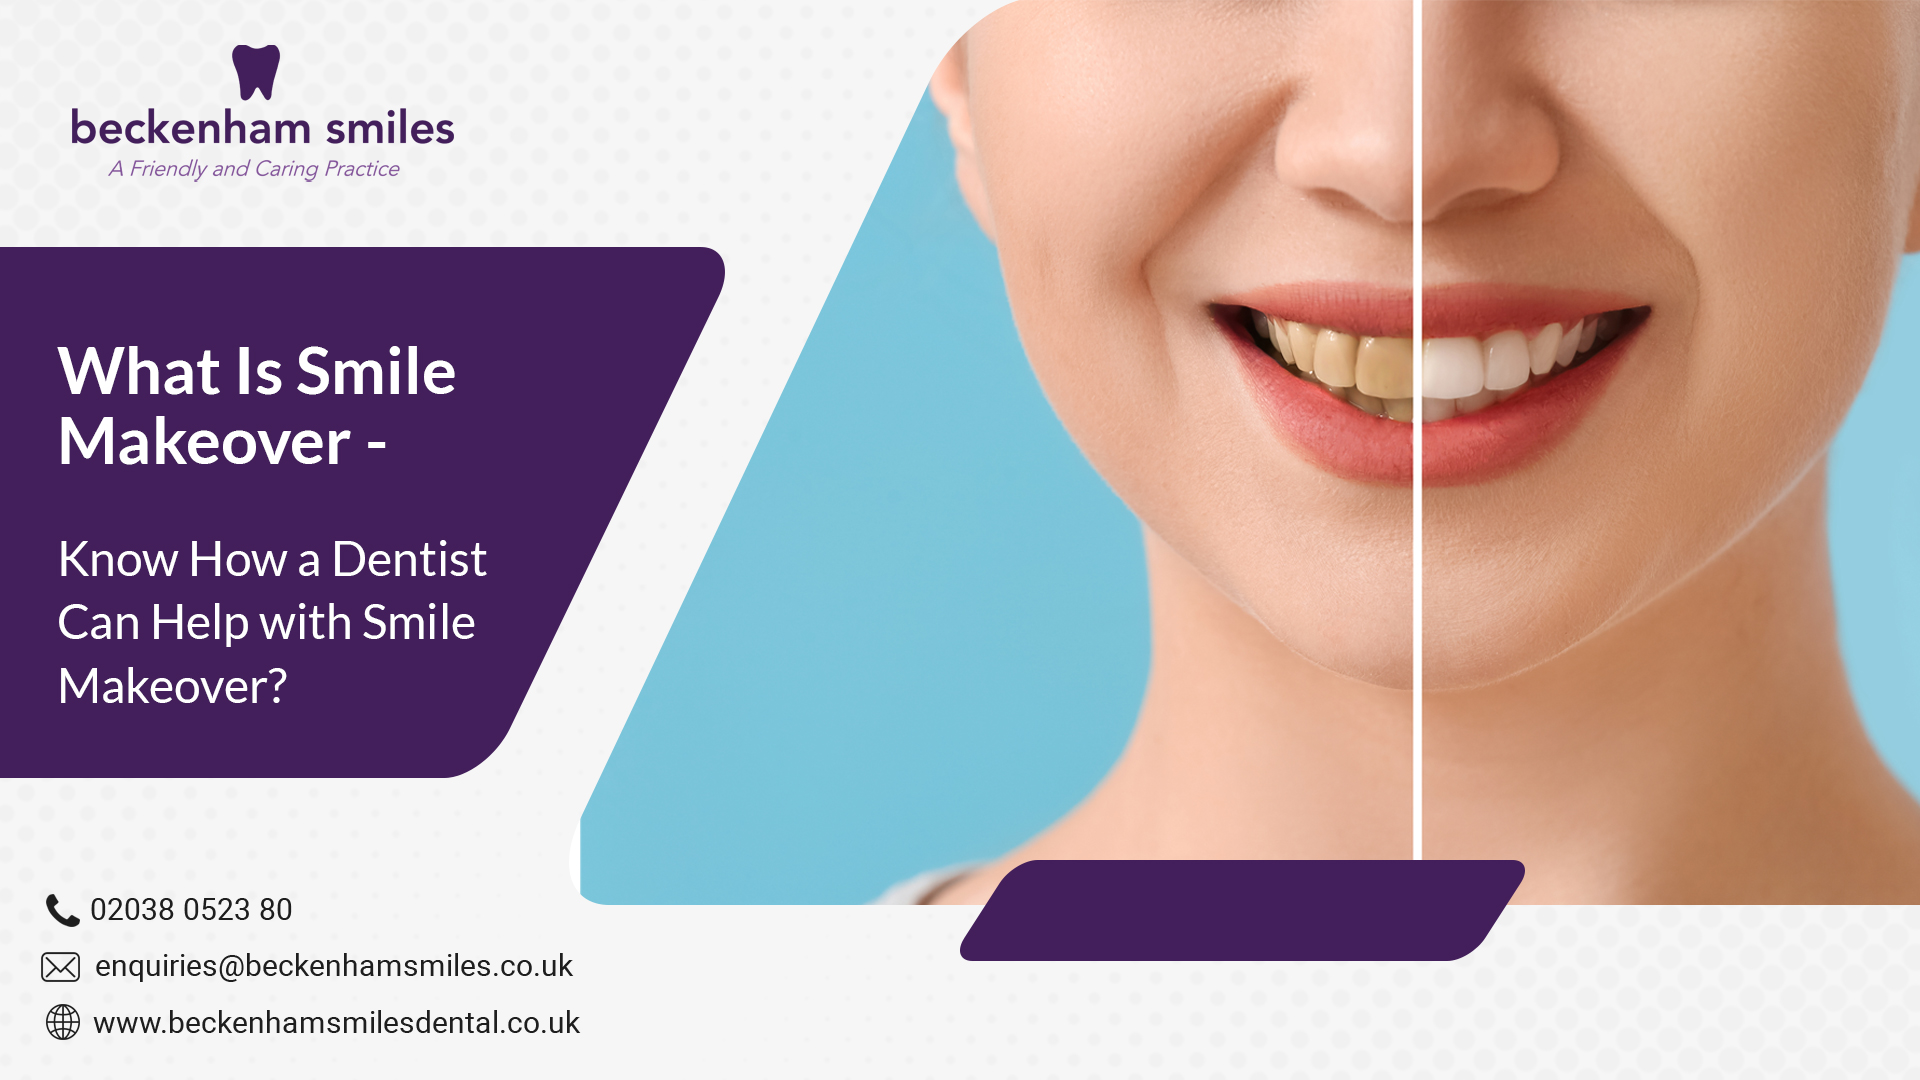 What Is Smile Makeover - Do you Know How a Dentist Can Help with a Smile Makeover?